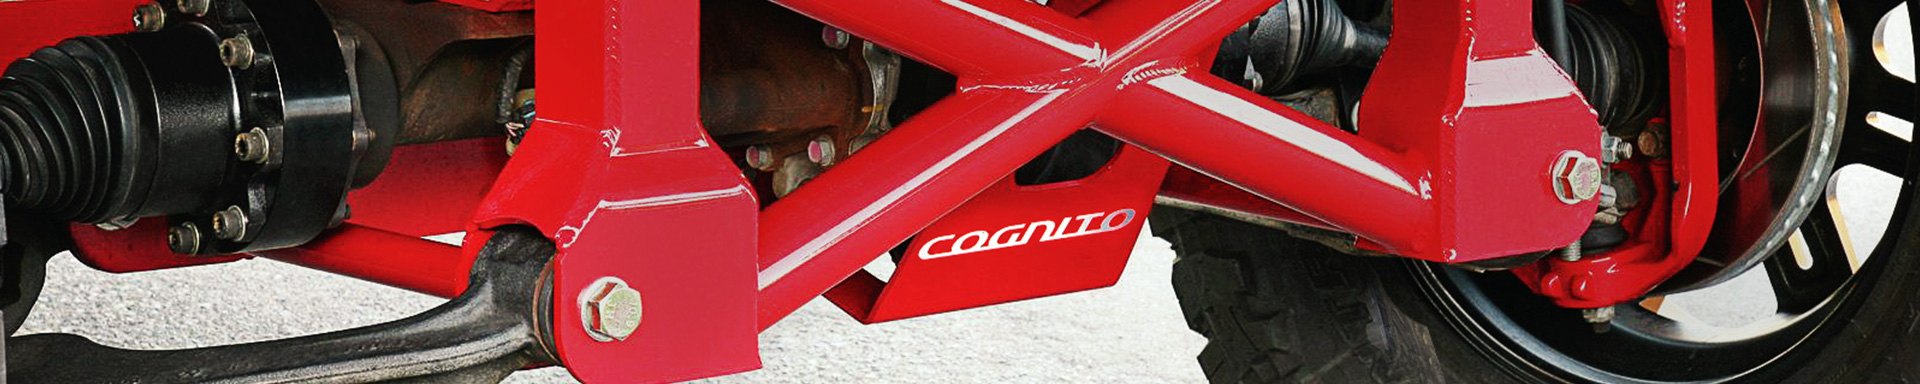 Cognito Motorsports Steering